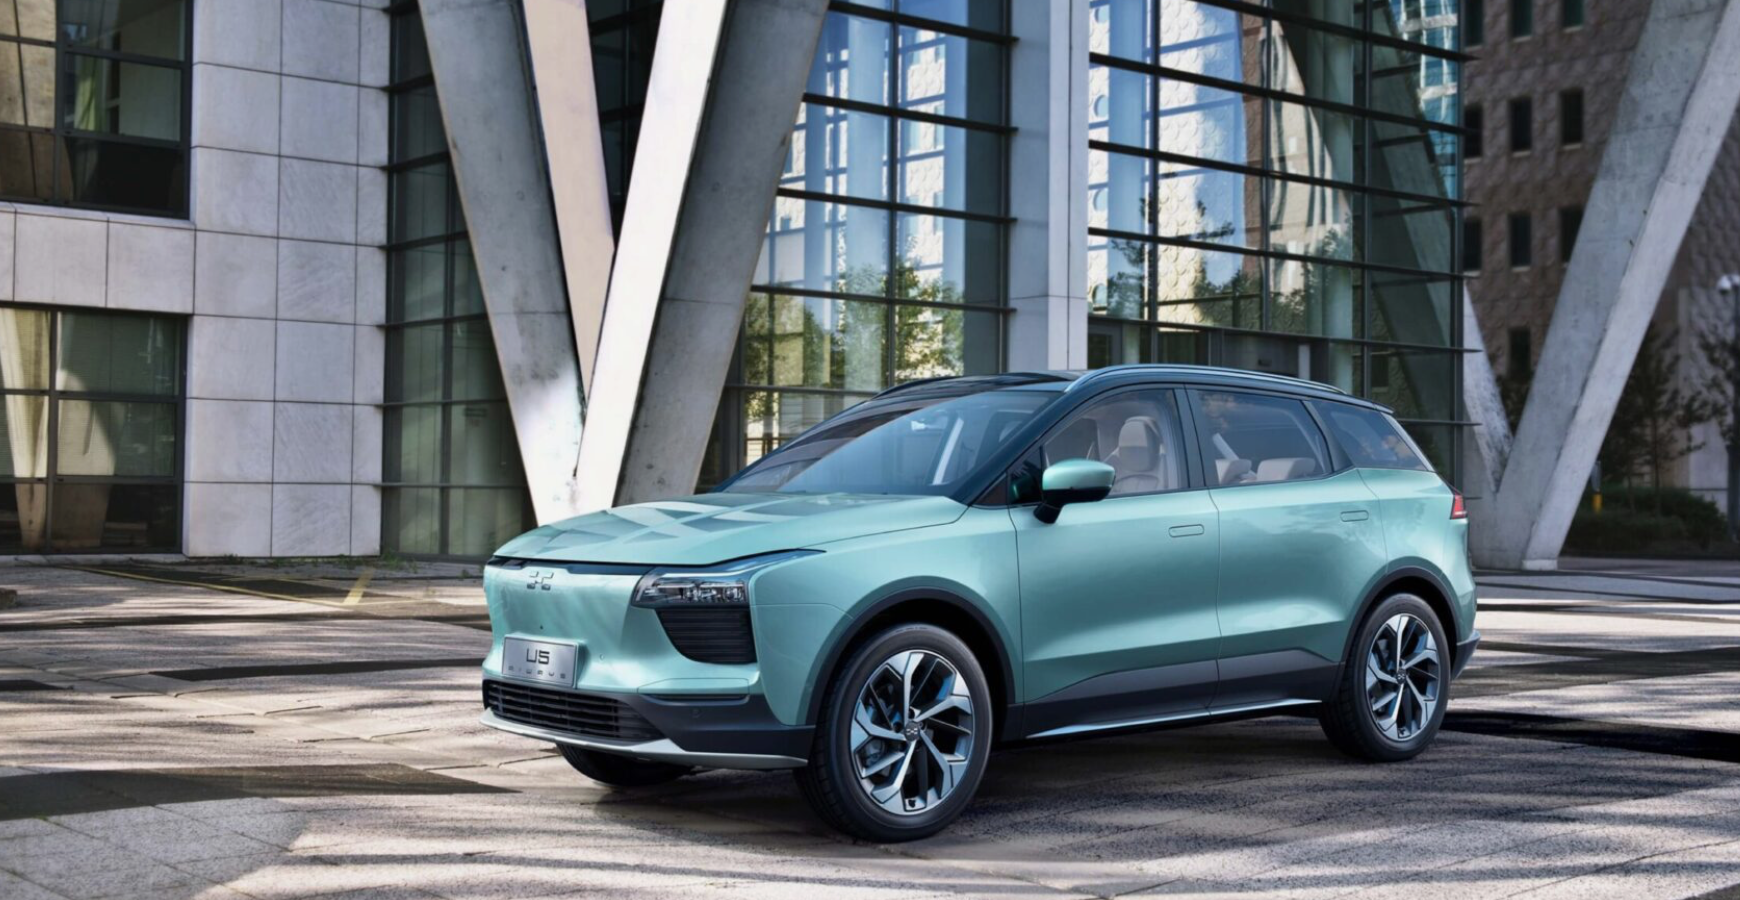 Will 2021 be the year of the EV breakthrough?